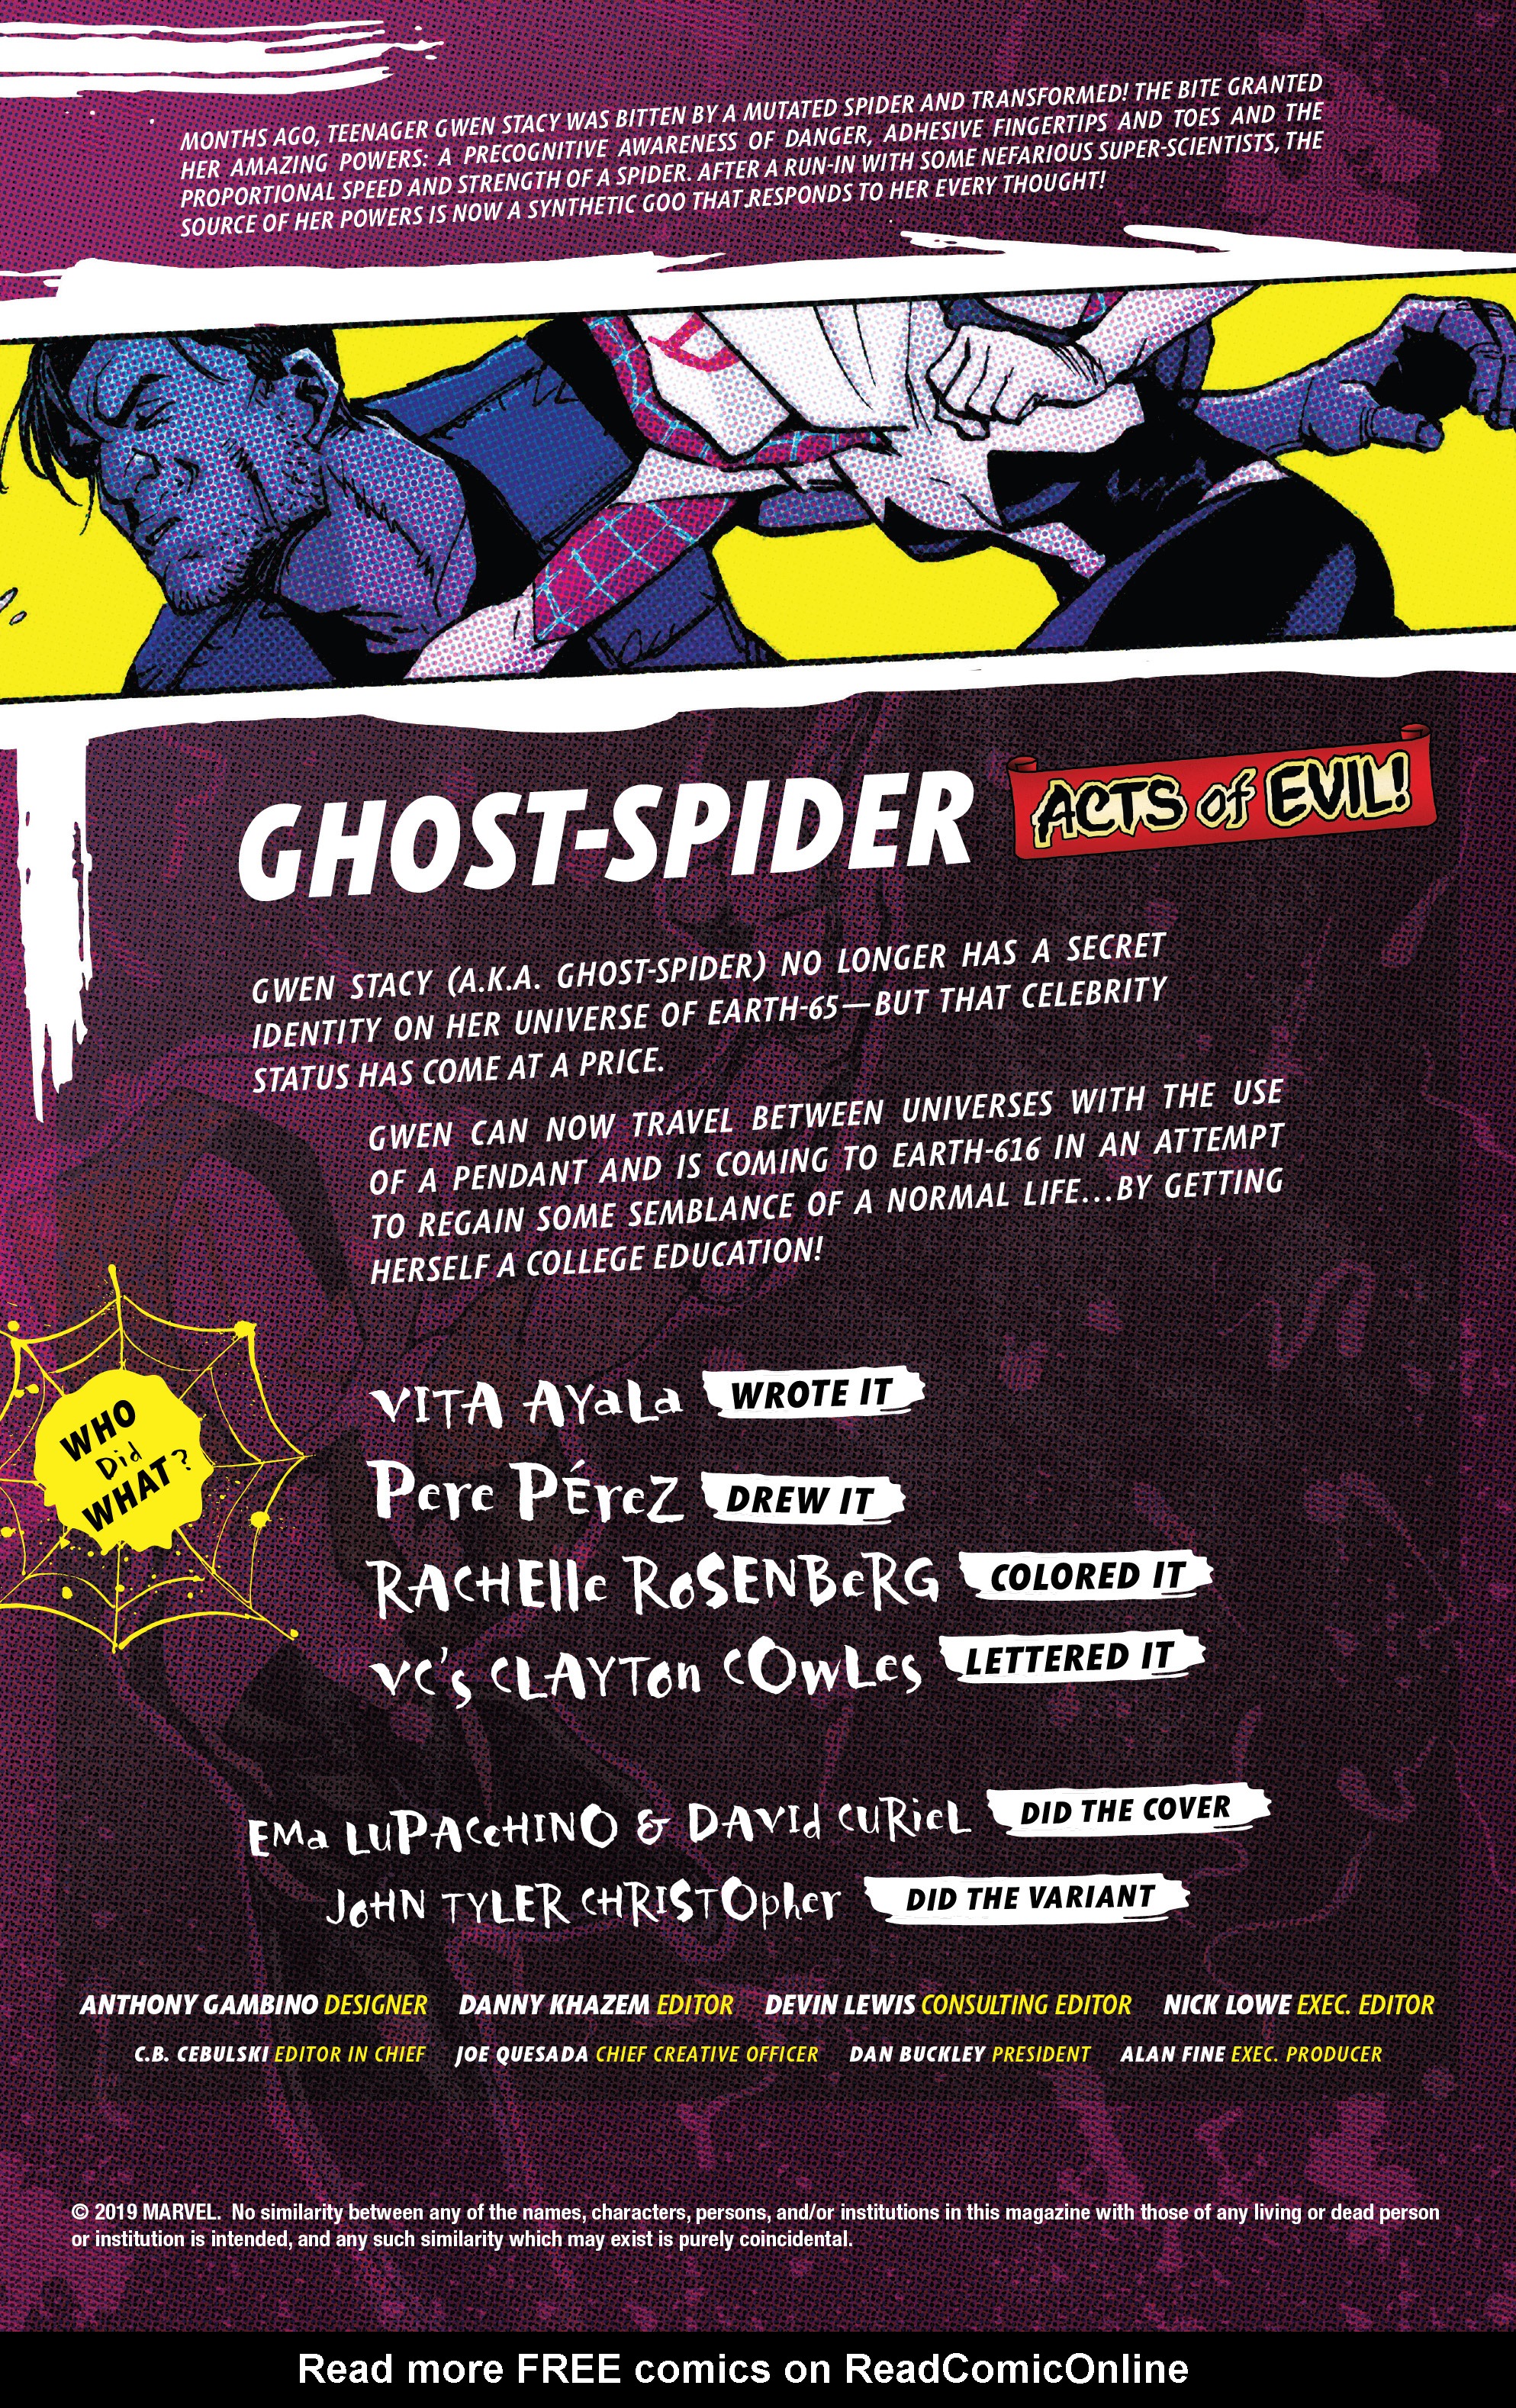 Read online Ghost-Spider comic -  Issue # Annual 1 - 2